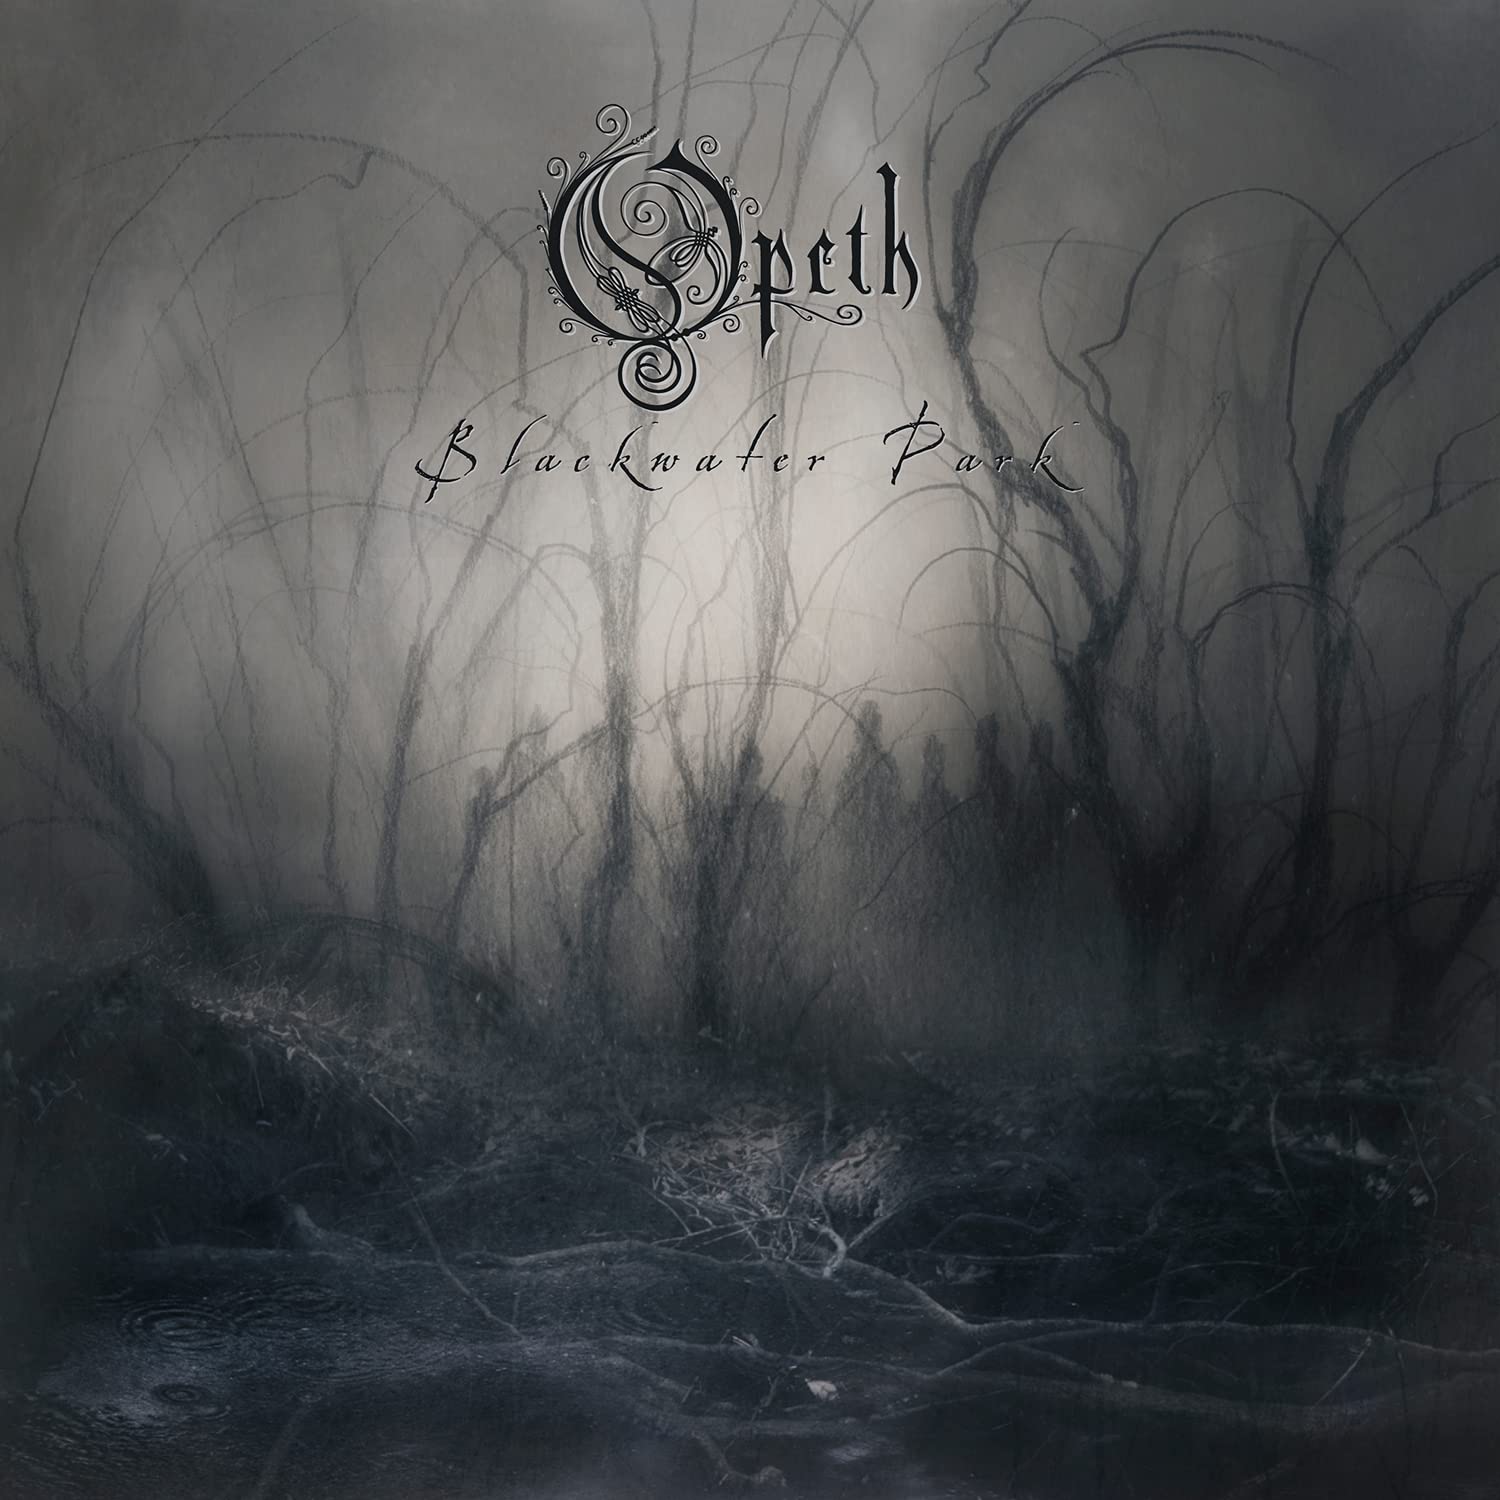 [DAMAGED] Opeth - Blackwater Park (20th Anniversary Edition) [Clear, Black, and White Vinyl]